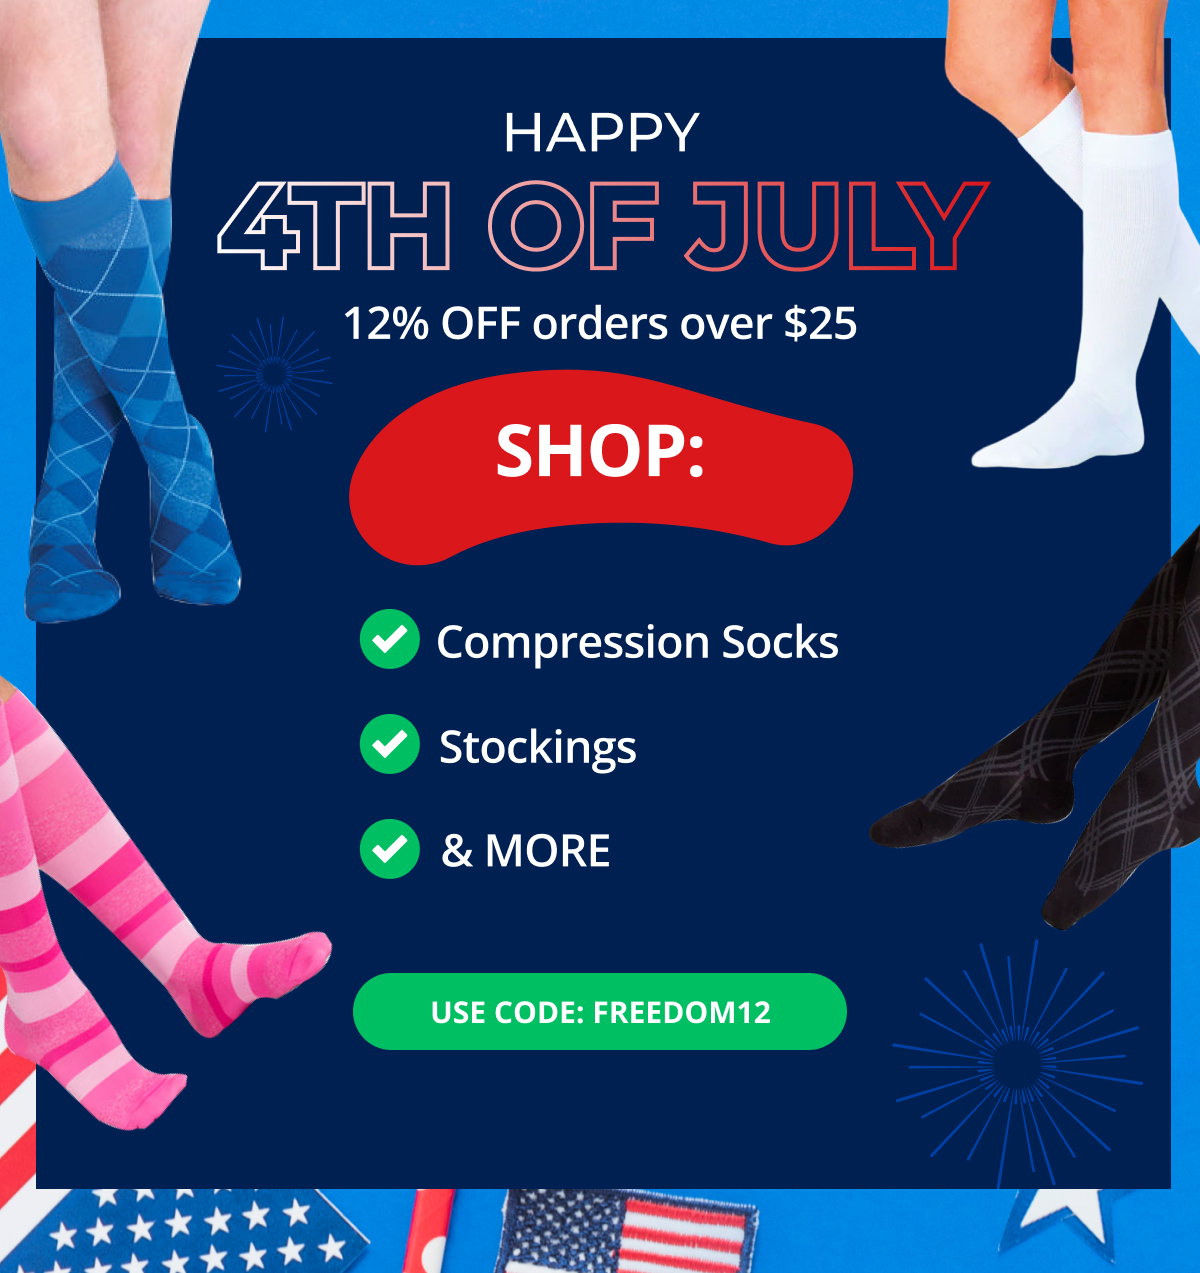 HAPPY 4TH OF JULY – 12% OFF orders over \\$25 SHOP: Compression Socks; Stockings; & MORE! Use Code: FREEDOM12